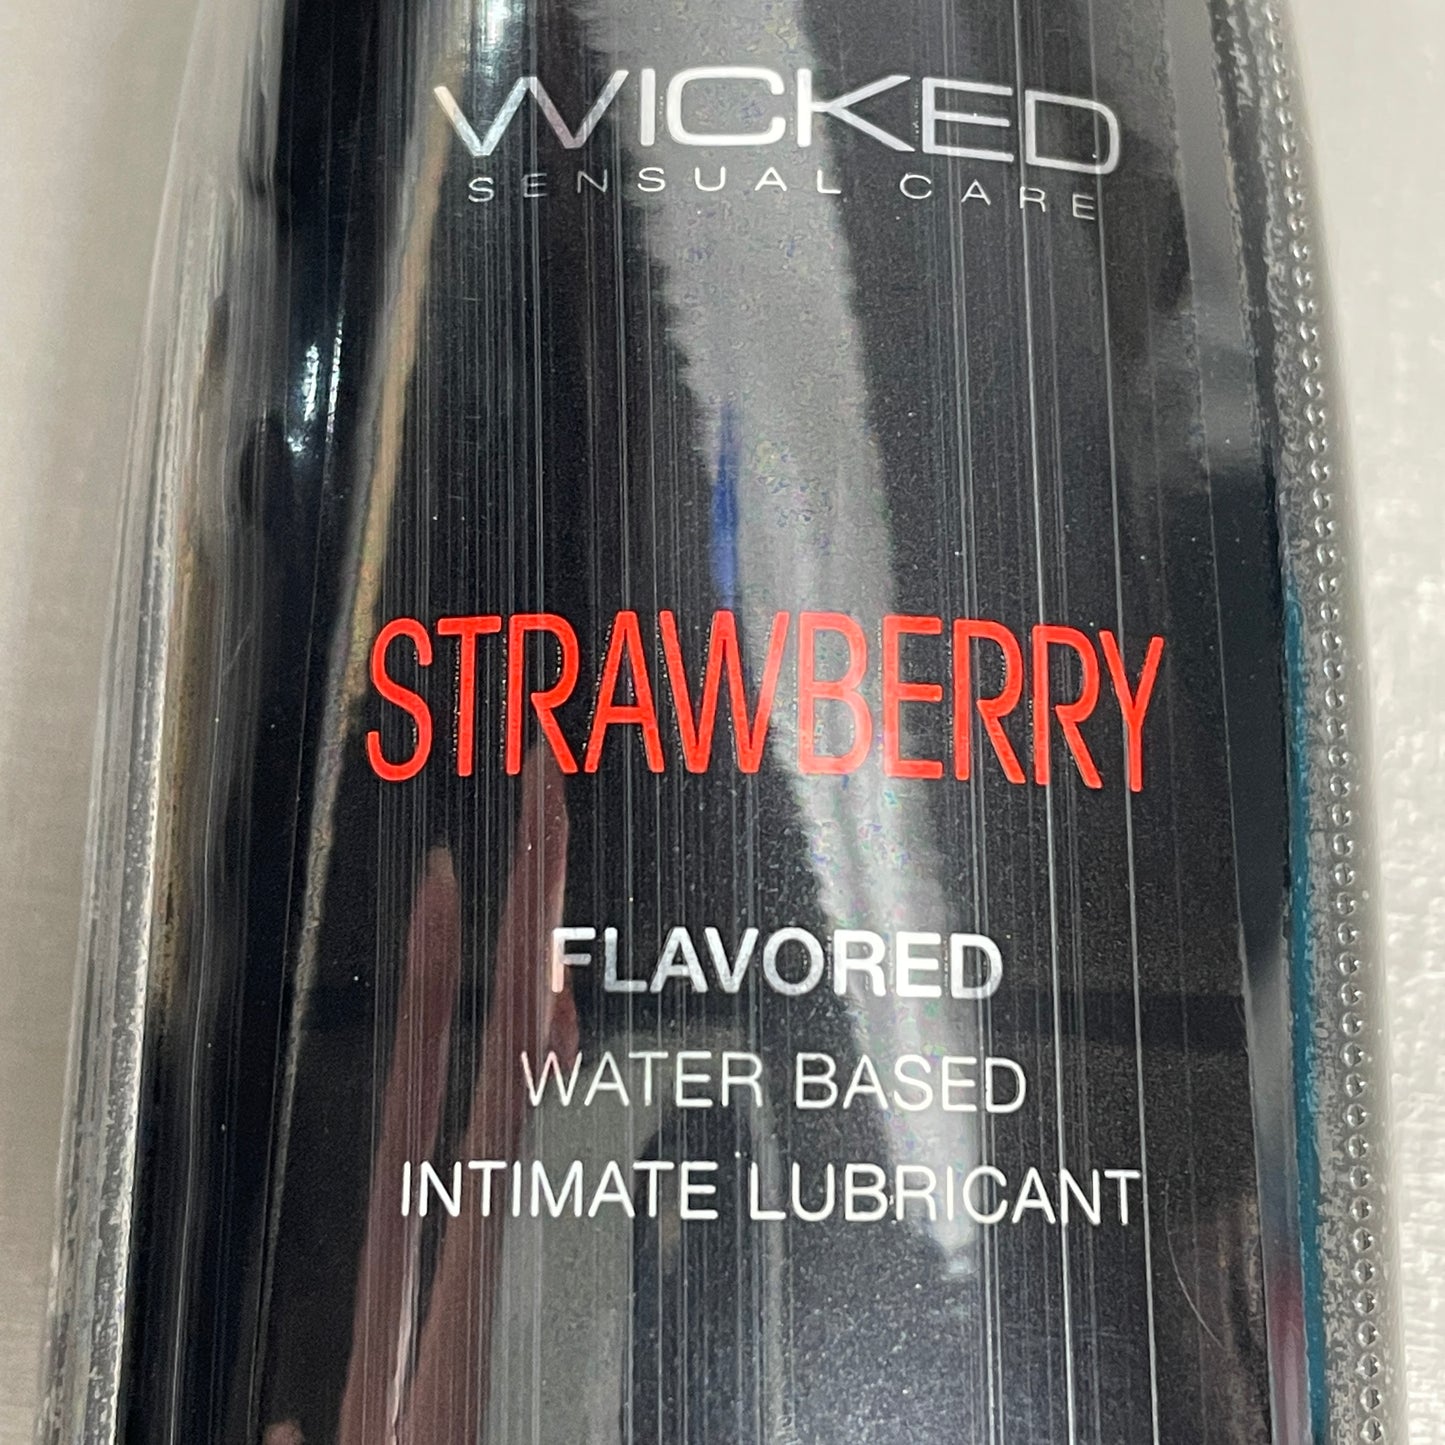 WICKED SENSUAL CARE Strawberry Flavored Water Based Intimate Lubricant 4 oz Exp 01/24 (New)